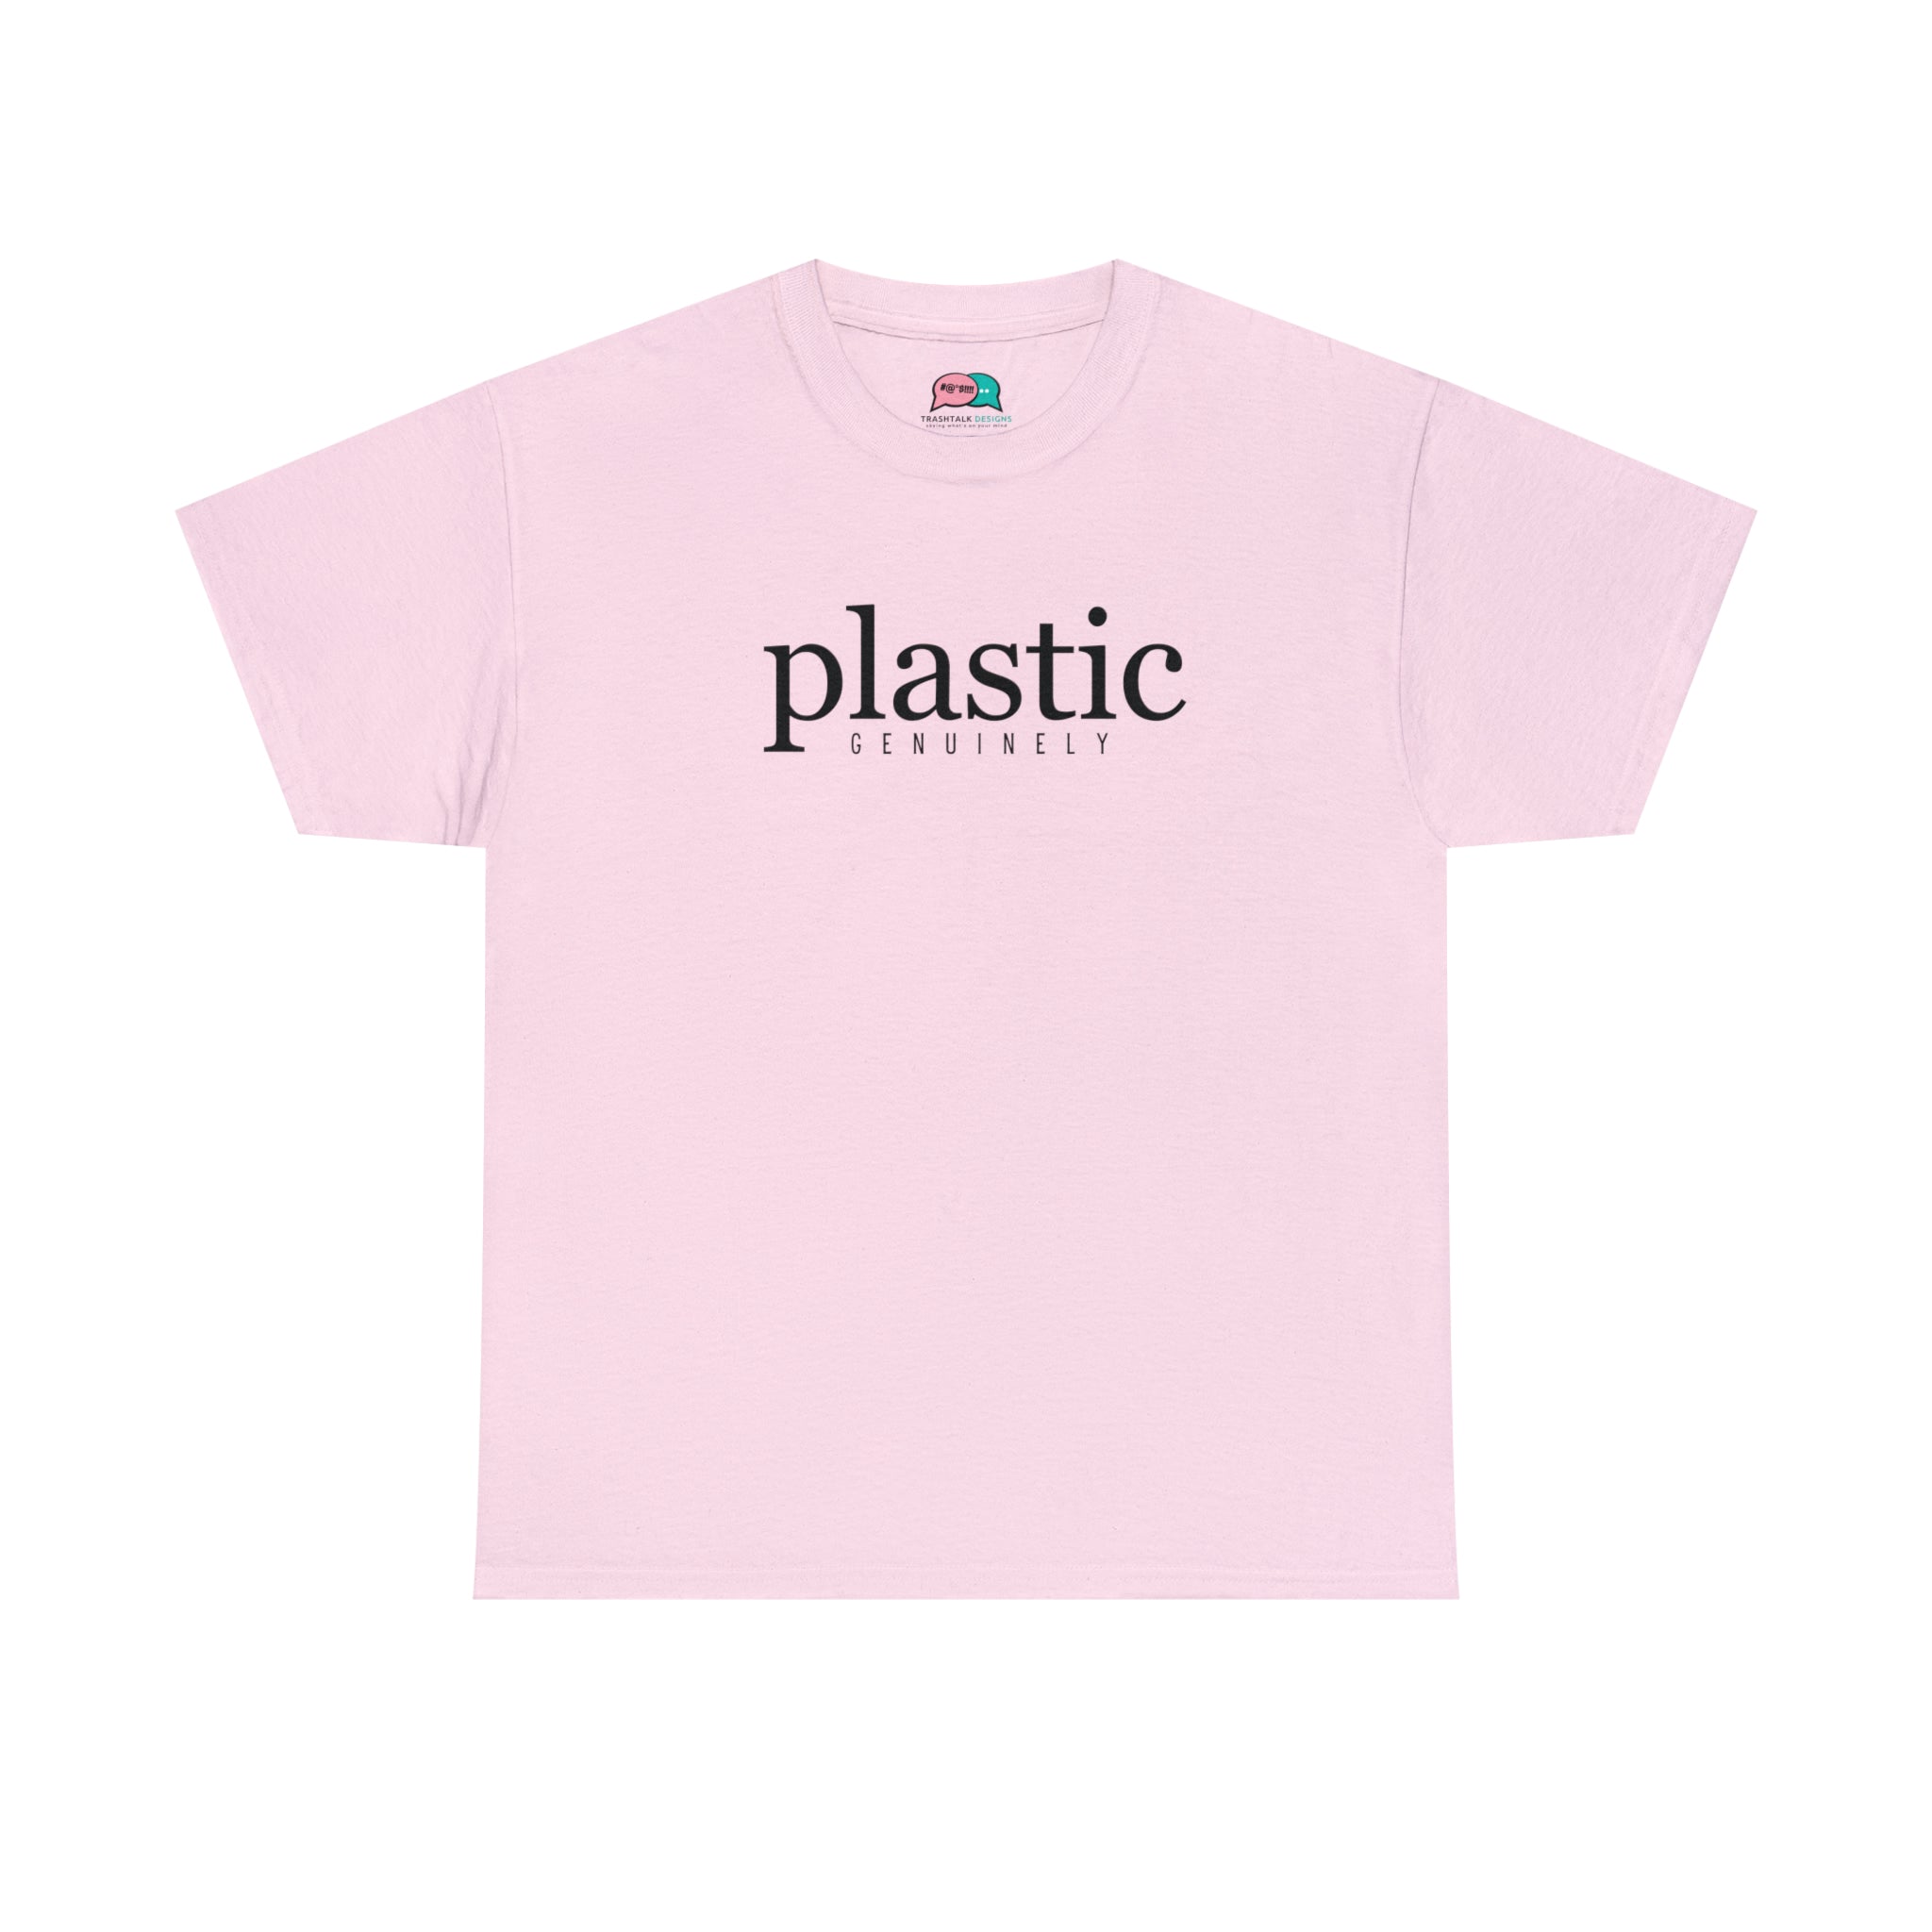  Genuinely PLASTIC Relaxed-Fit Cotton T-Shirt, Female Empowerment Shirt, Cute Graphic T-shirt T-ShirtLightPink5XL